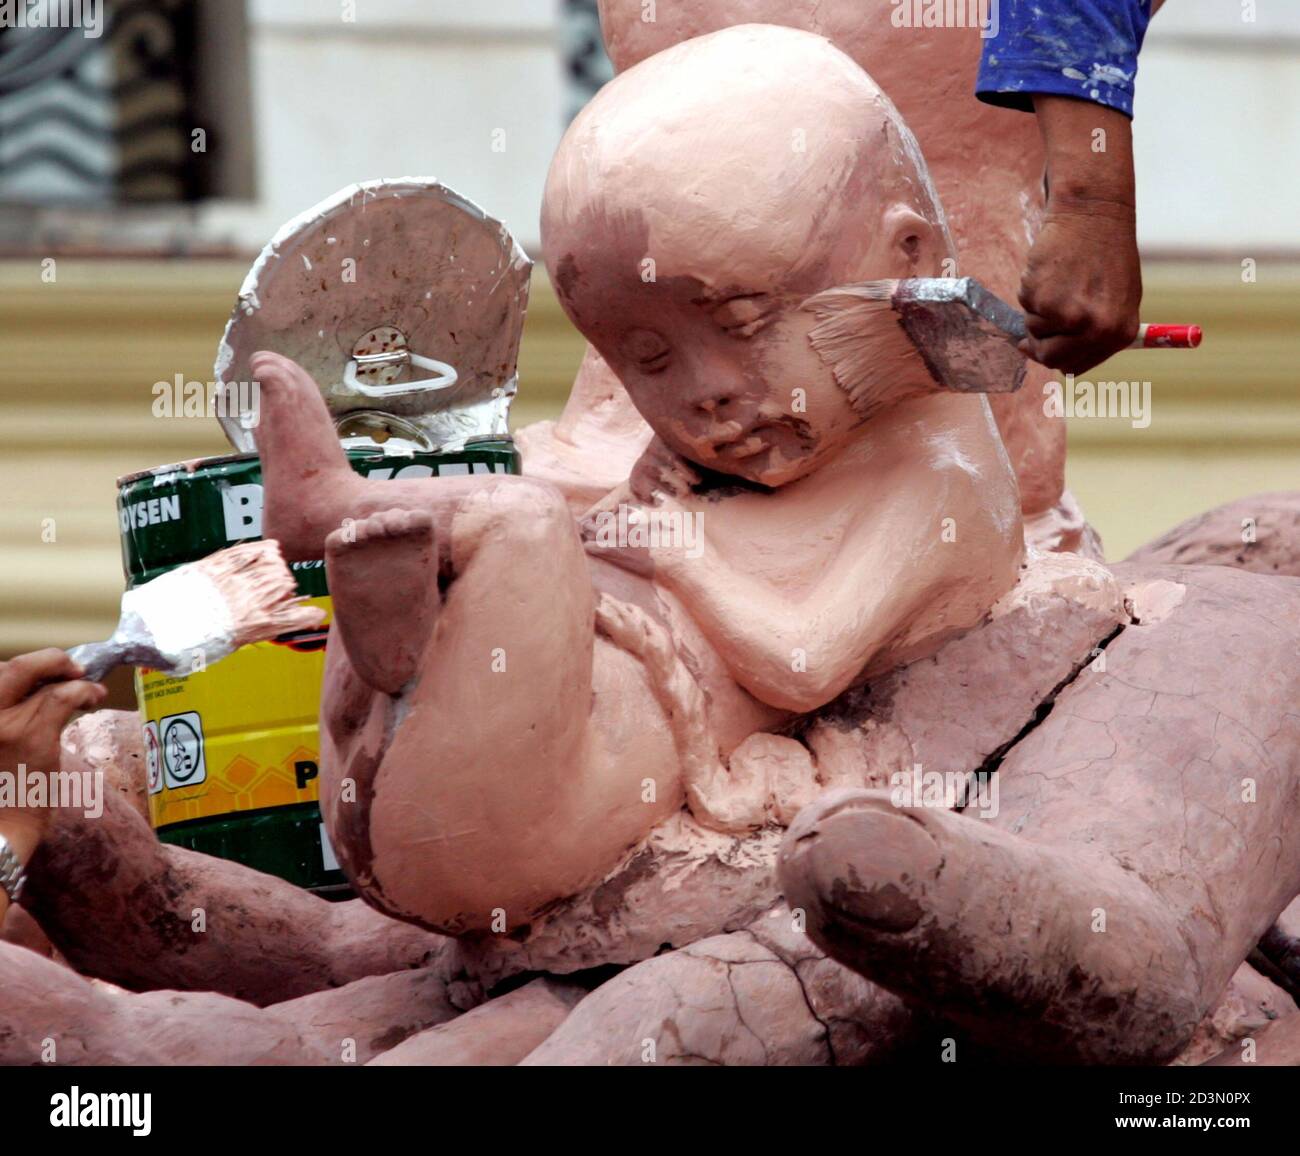 Filipino workers paint a monument for the unborn child, built outside a church in Manila, to oppose abortion in Asia's only predominantly Roman Catholic country April 4, 2005. Filipinos joined 1.1 billion other Roman Catholics around the world in mourning the death of Pope John Paul II, who had championed the anti-abortion cause. The Pope died on Saturday night in the Vatican City. REUTERS/Erik de Castro  edc/JK Stock Photo